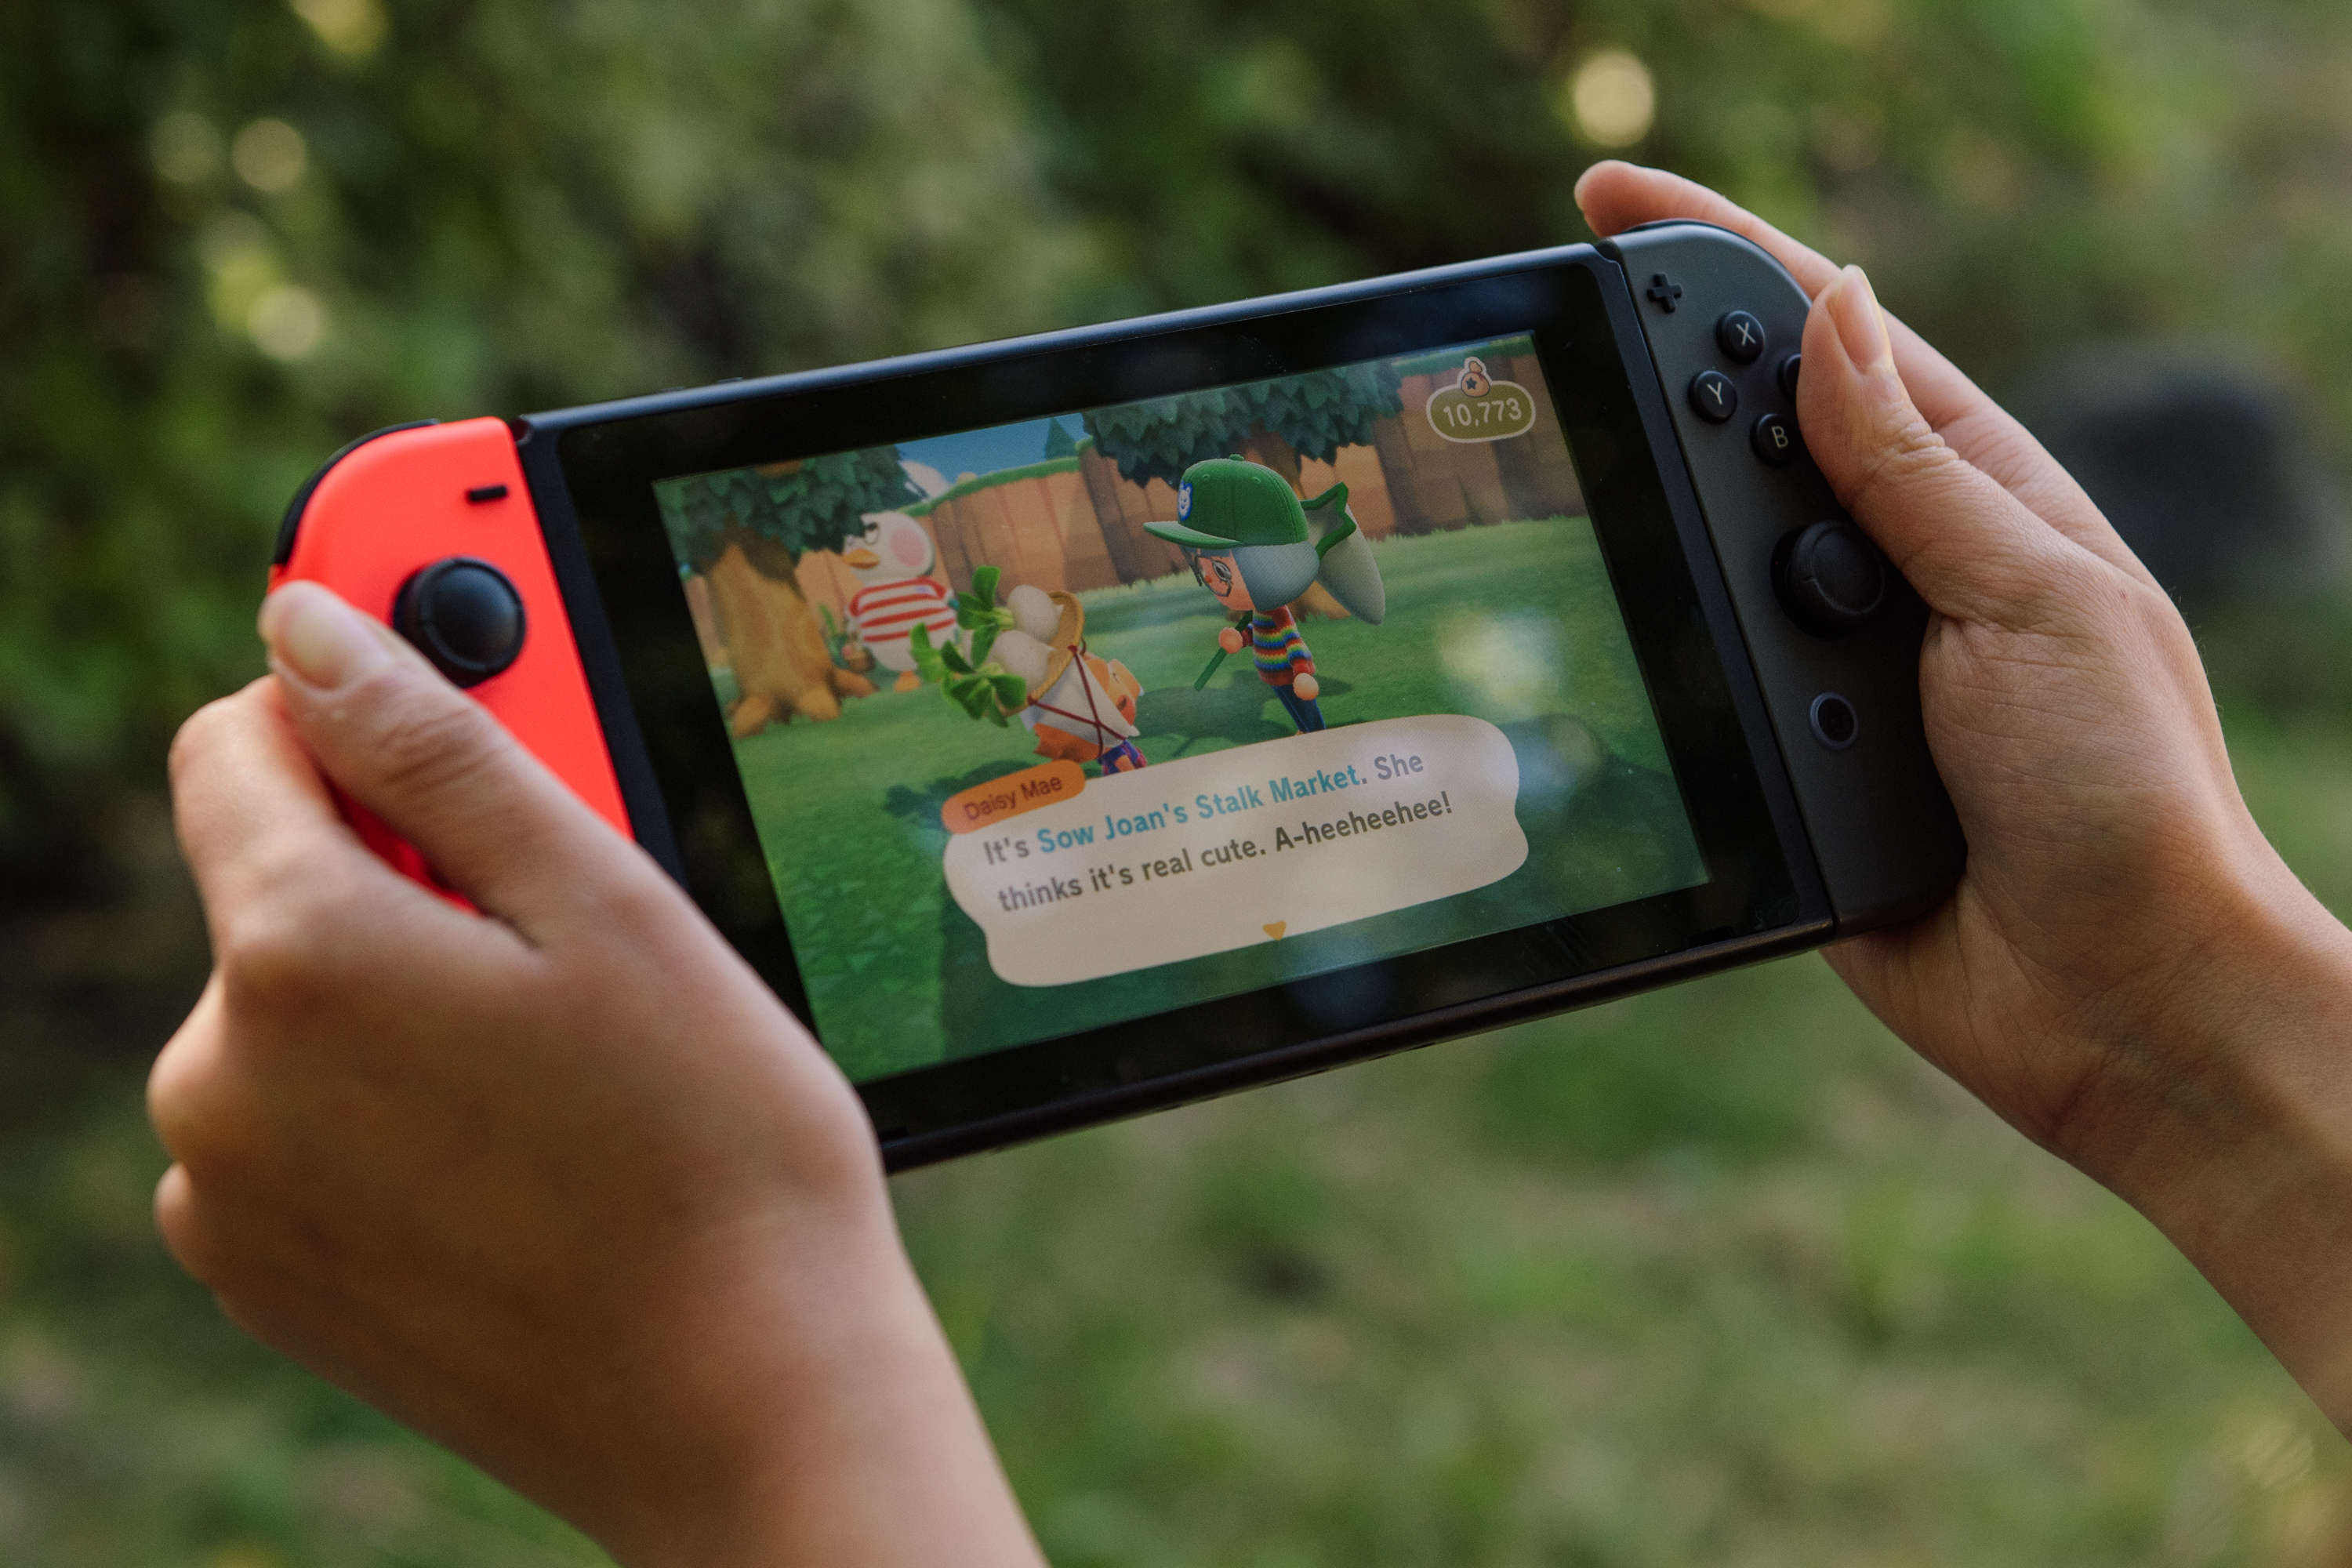 Nintendo Switch with Animal Crossing